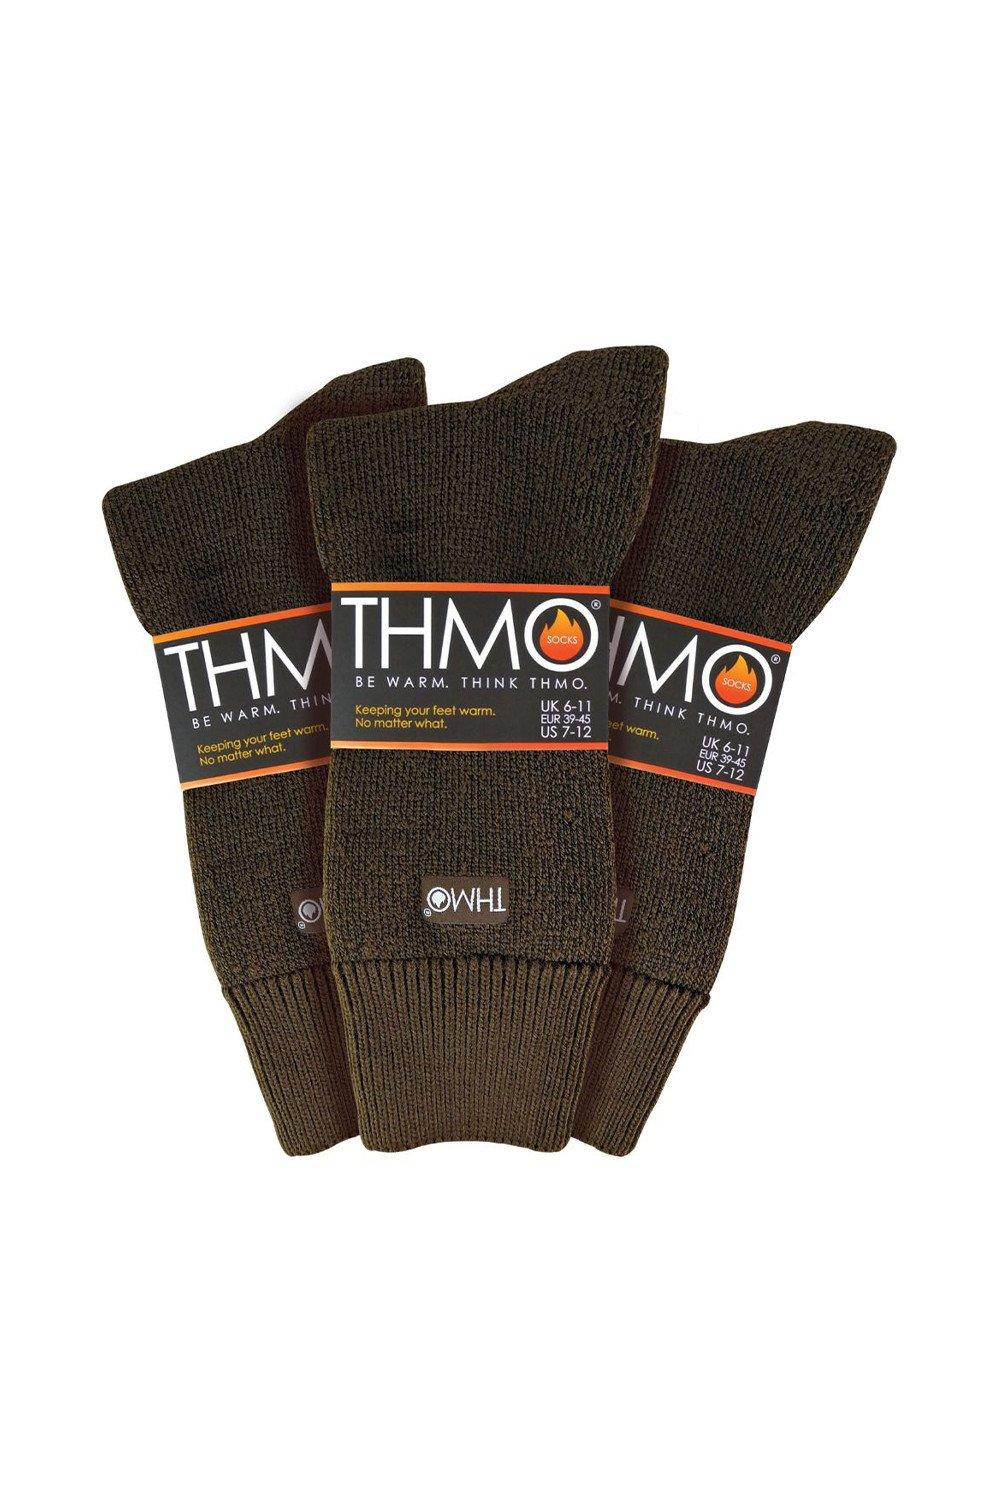 3 Pairs Thick Brushed Inside Winter Thermal Socks with Comfort Top